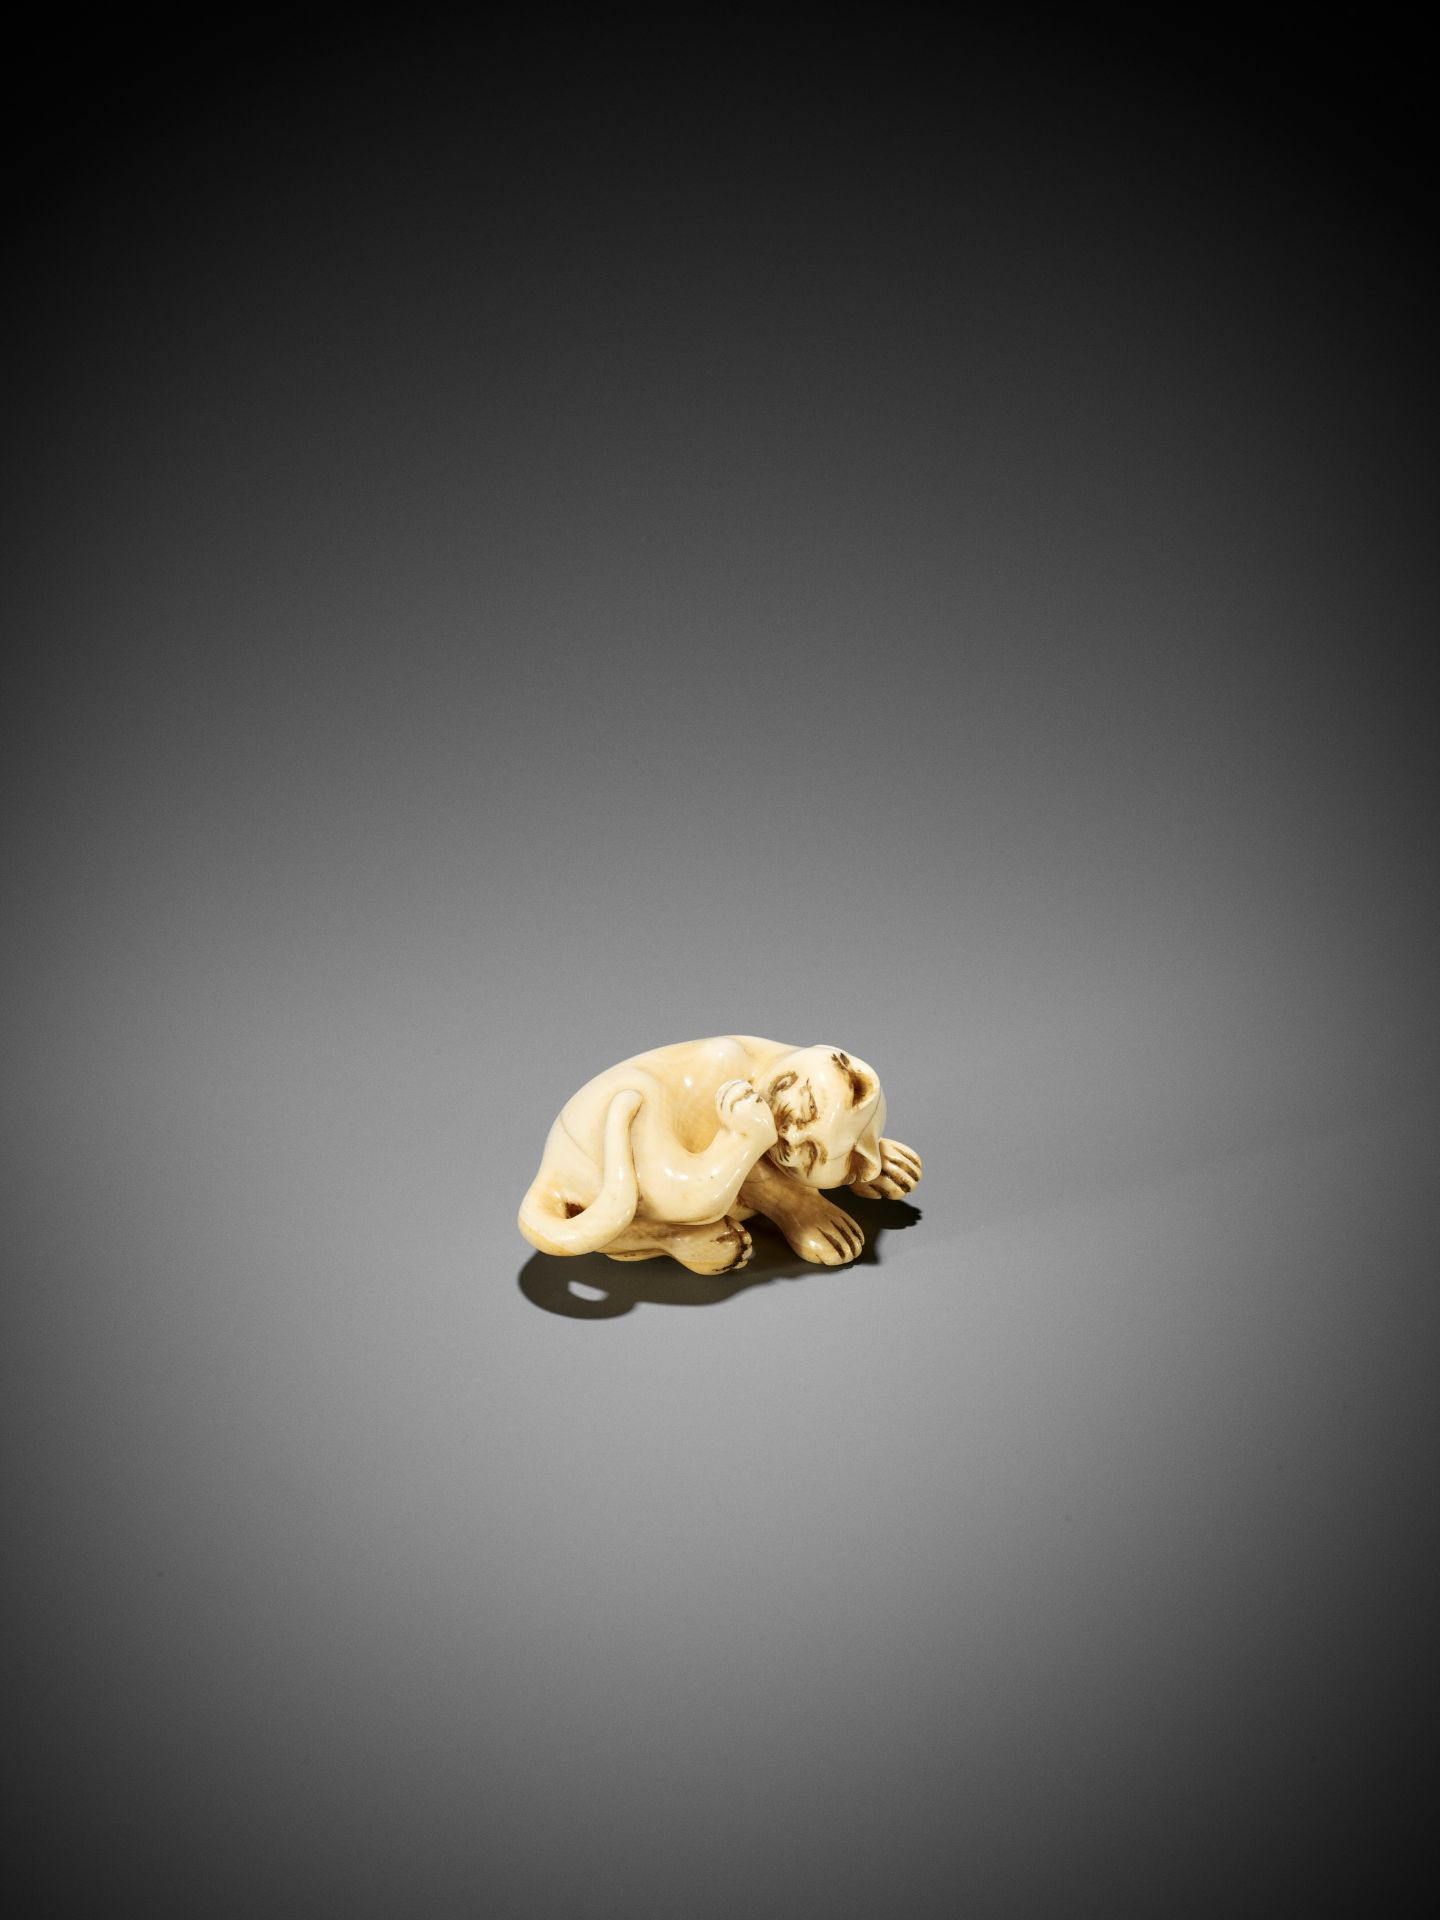 AN IVORY NETSUKE OF A CAT GROOMING ITSELF - Image 2 of 9